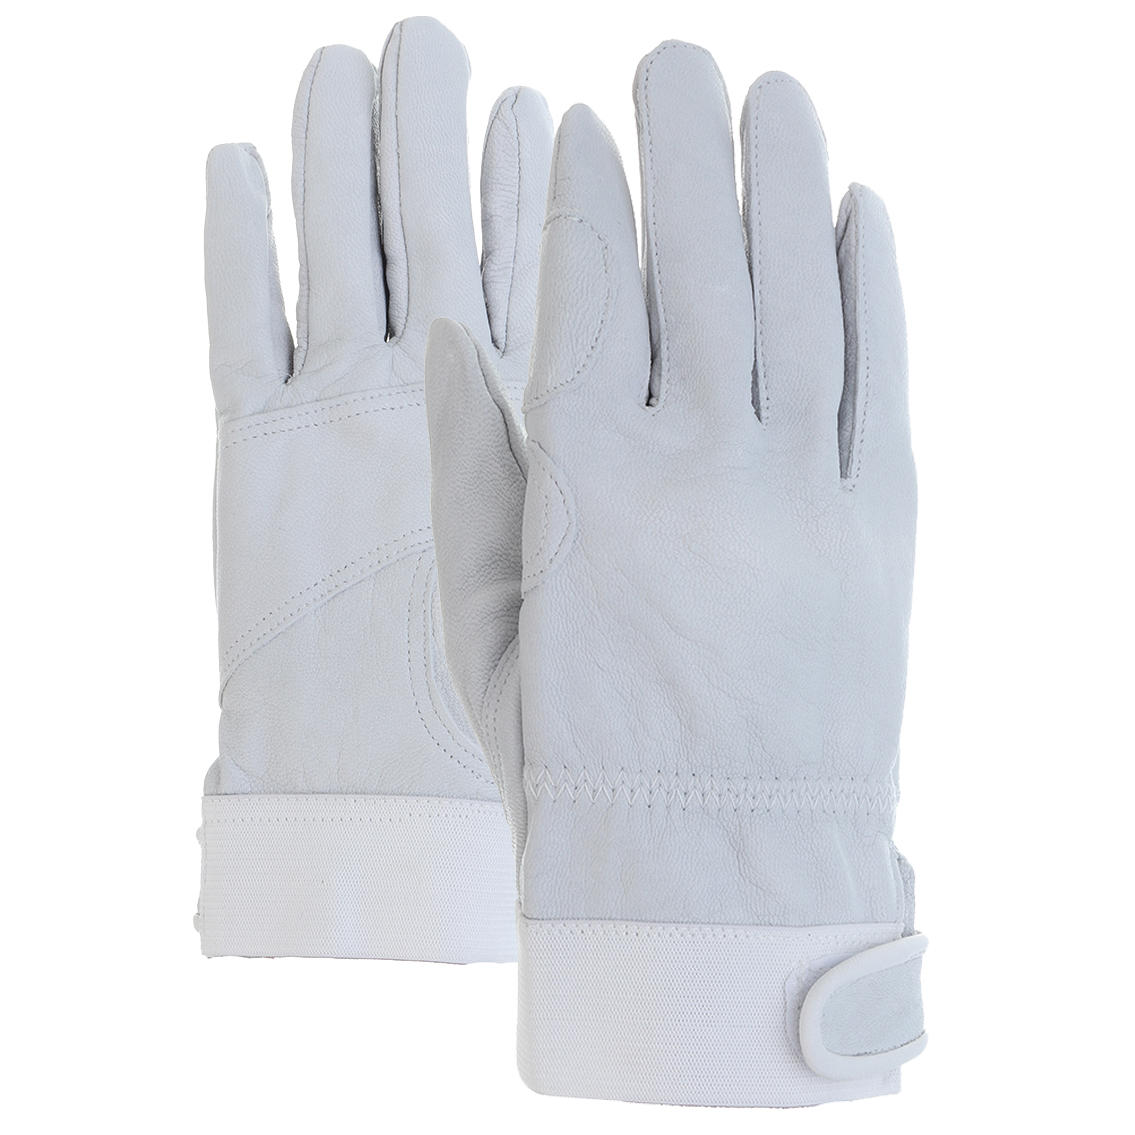 

Fire Proof Protective Gloves Fire Resistant Anti-static Safety Gloves for Firefighter Cabretta Leather